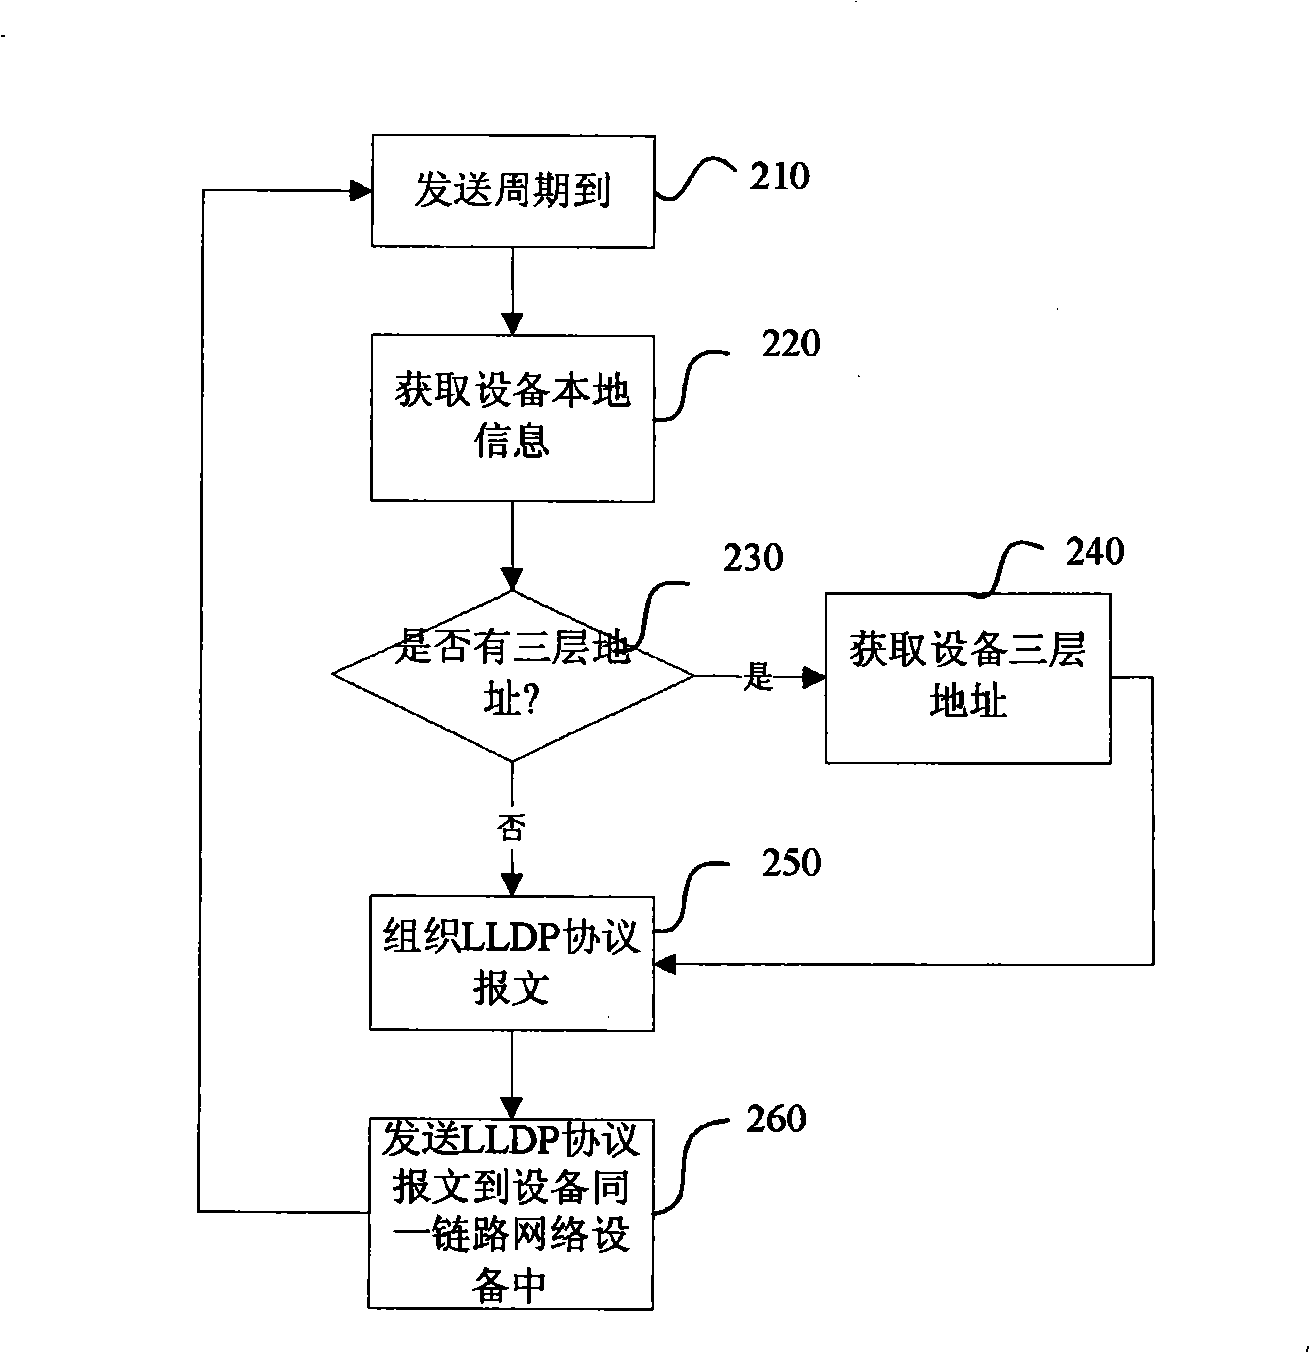 Method for discovering protocol and acquiring network connection information by utilization of link layer